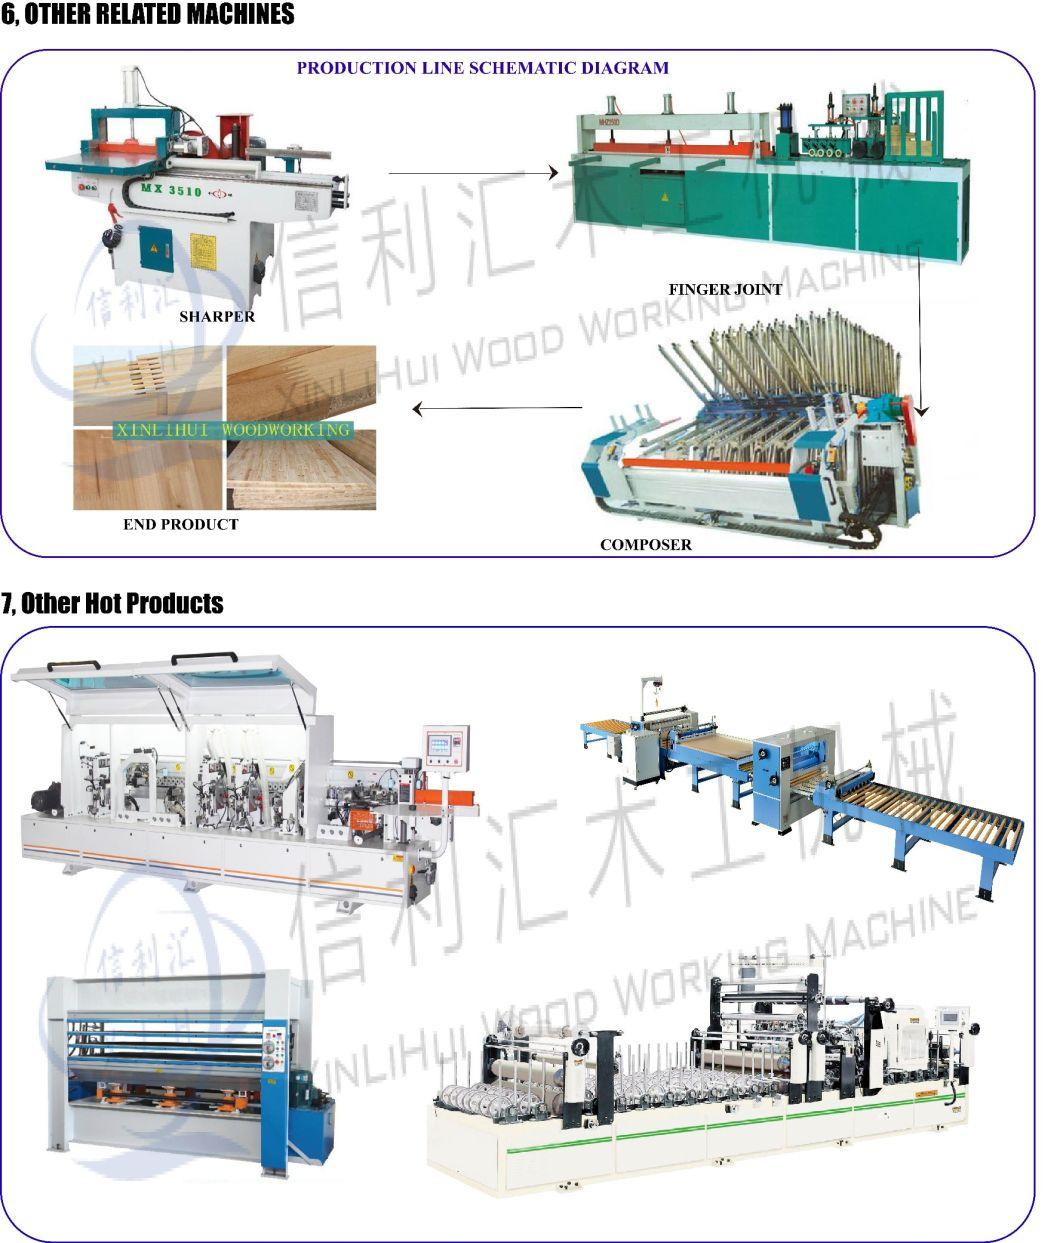 Fully Automatic Log Splitter and Saw Machine/Log Cutting Machine Large Size Saw Mill Machine for Big Woods Cutting